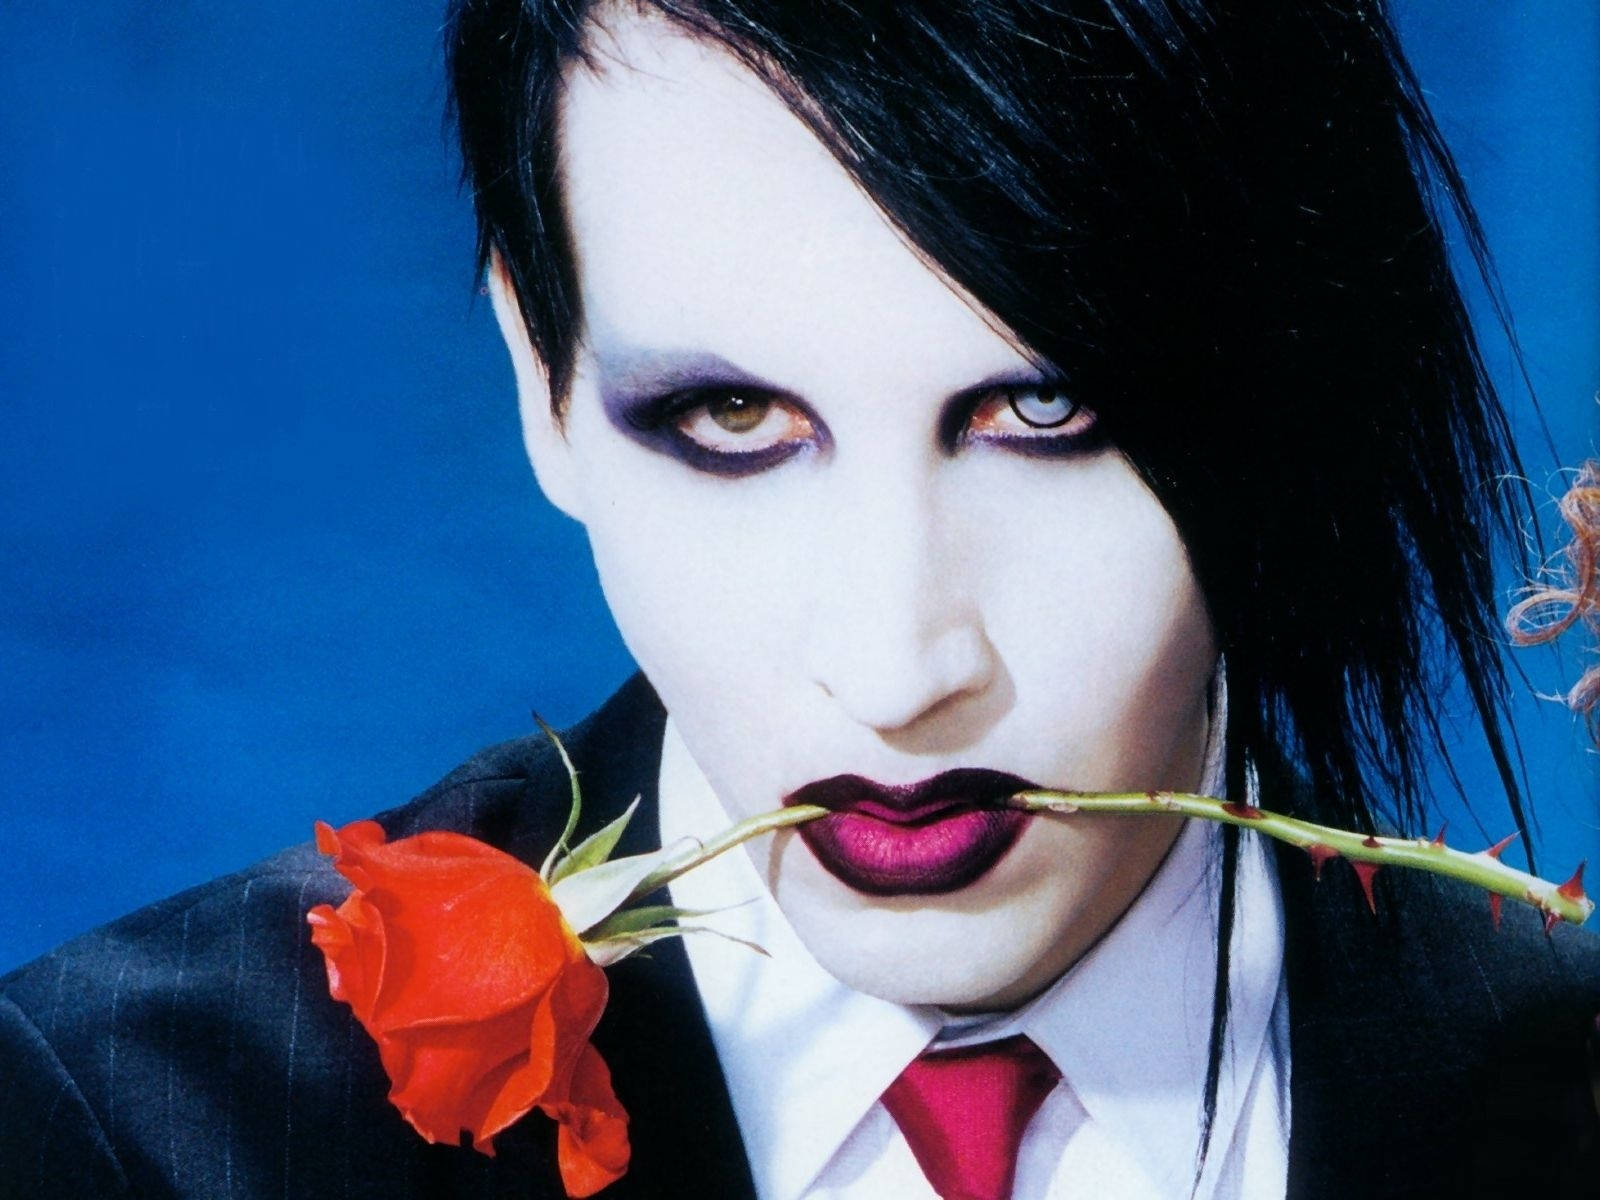 “Marilyn Manson displaying his iconic look and style” Wallpaper